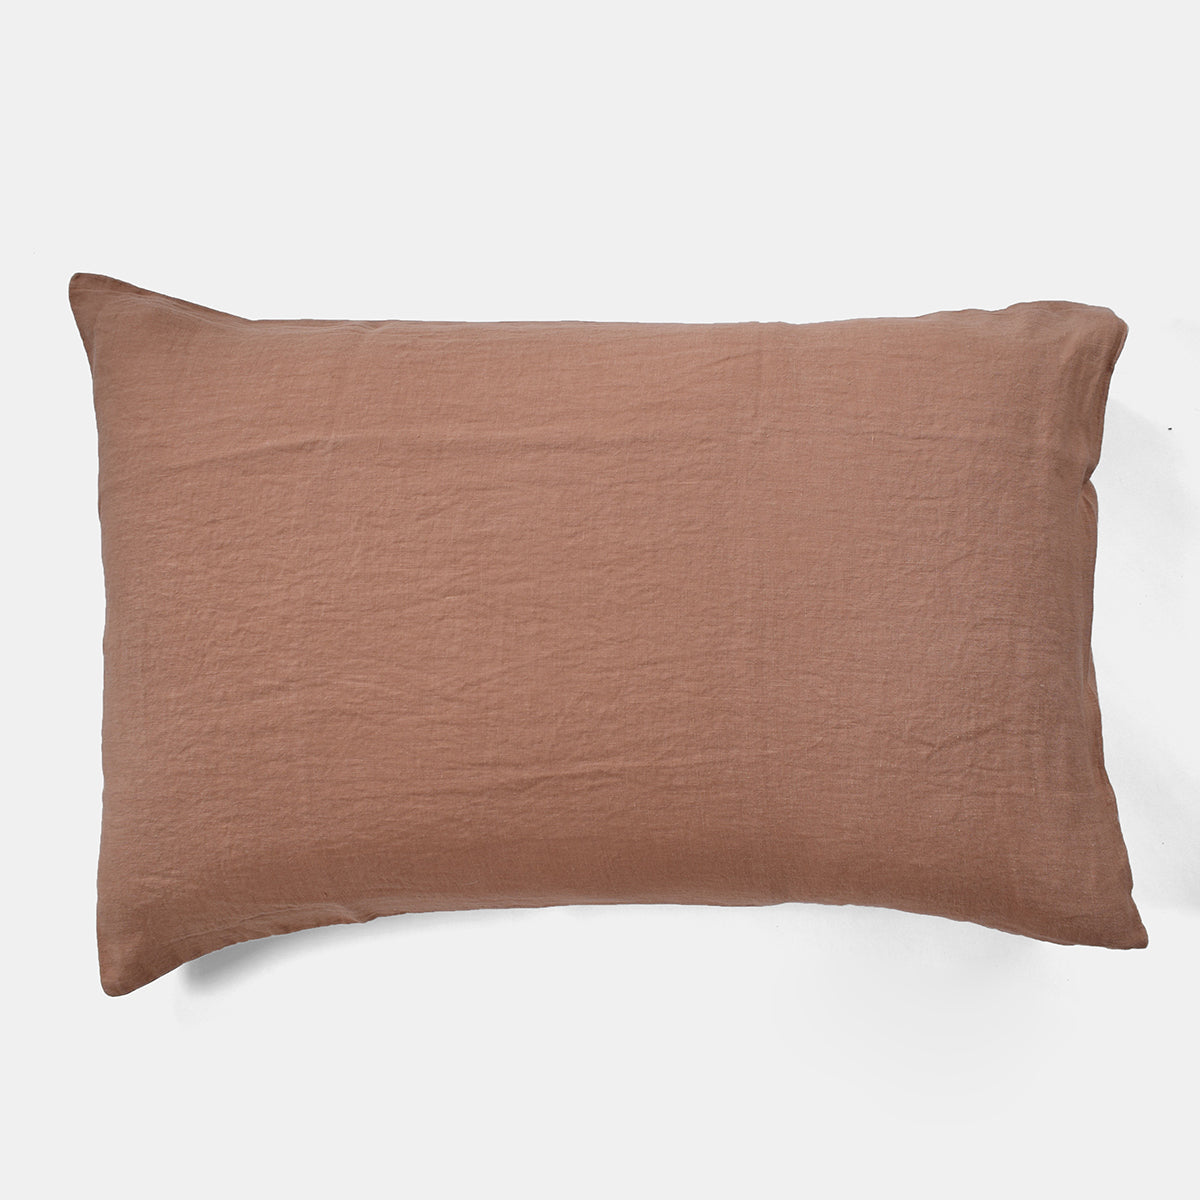 Linge Particulier Moka Standard Linen Pillowcase Sham for a colorful linen bedding look in earthy clay pink - Collyer&#39;s Mansion